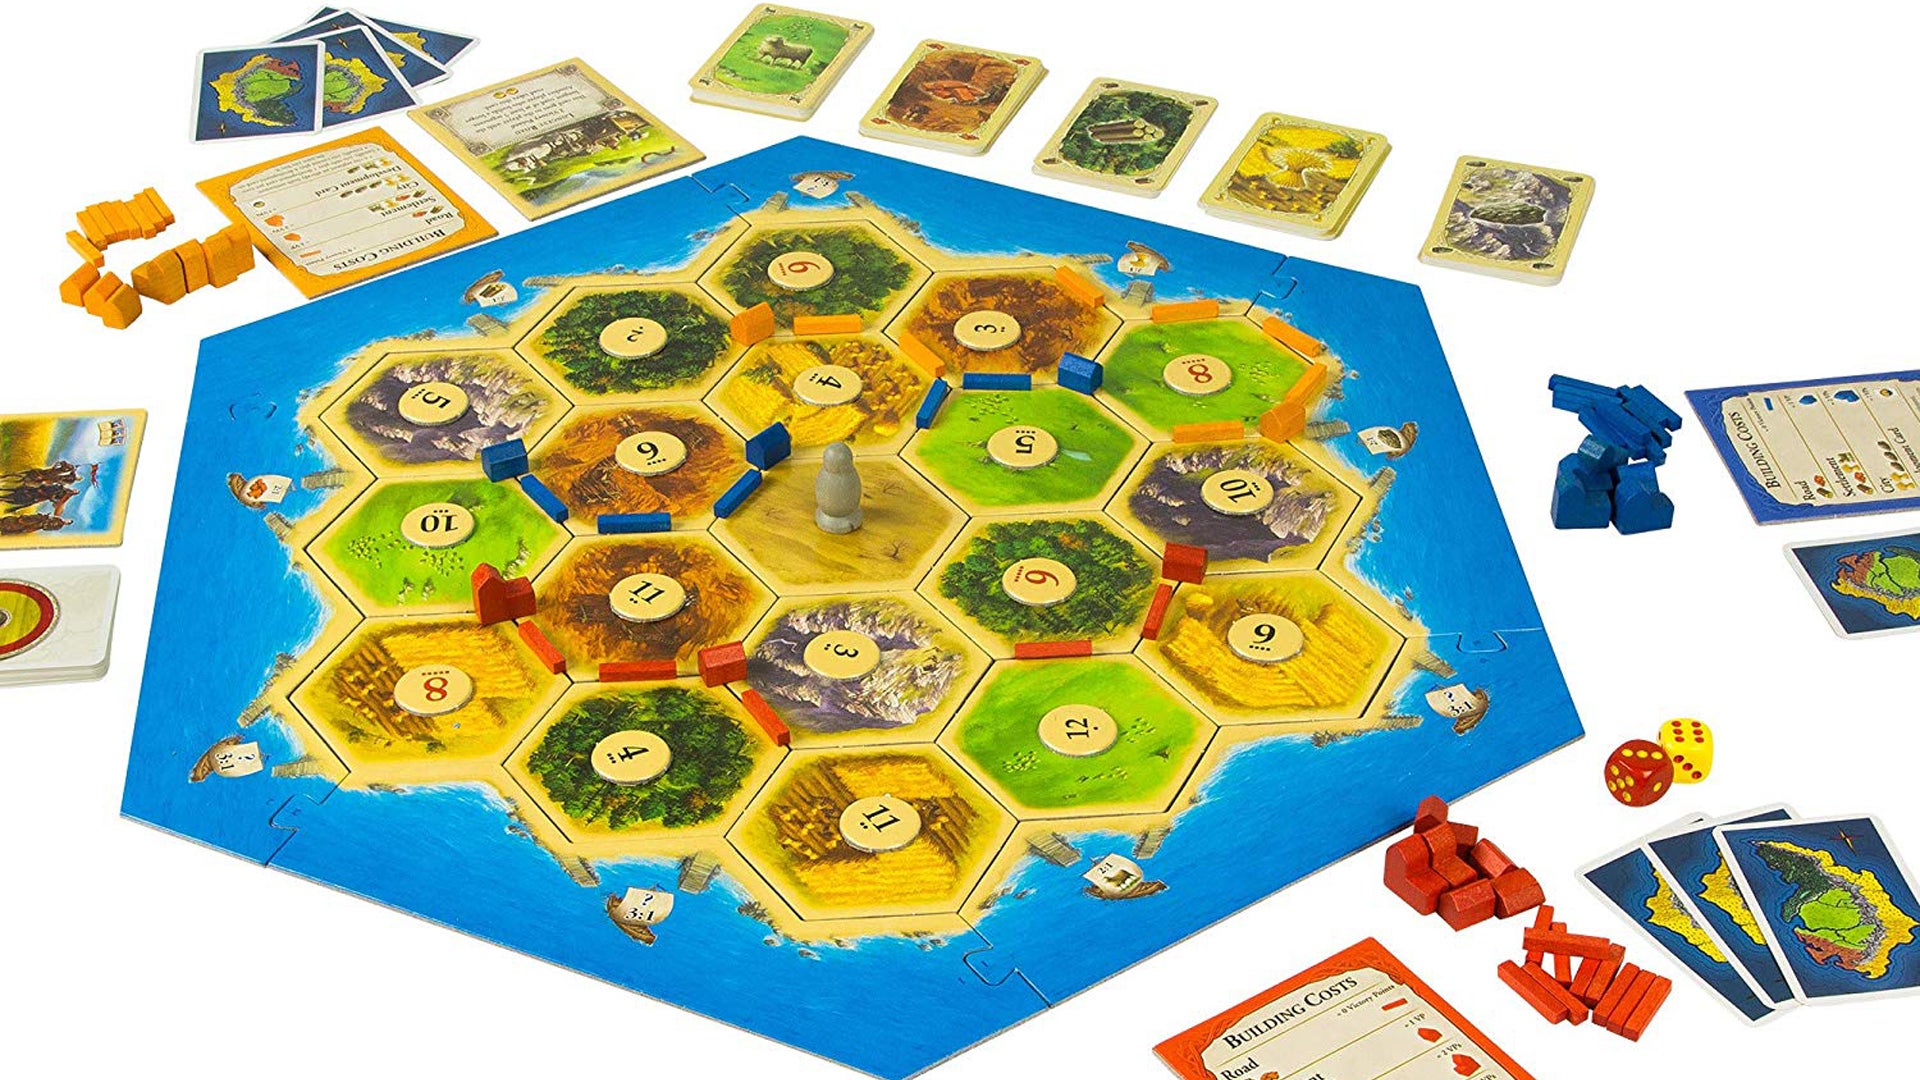 5-6 Players Extension Details about  / The Settlers of Catan Board Game 4th Edition